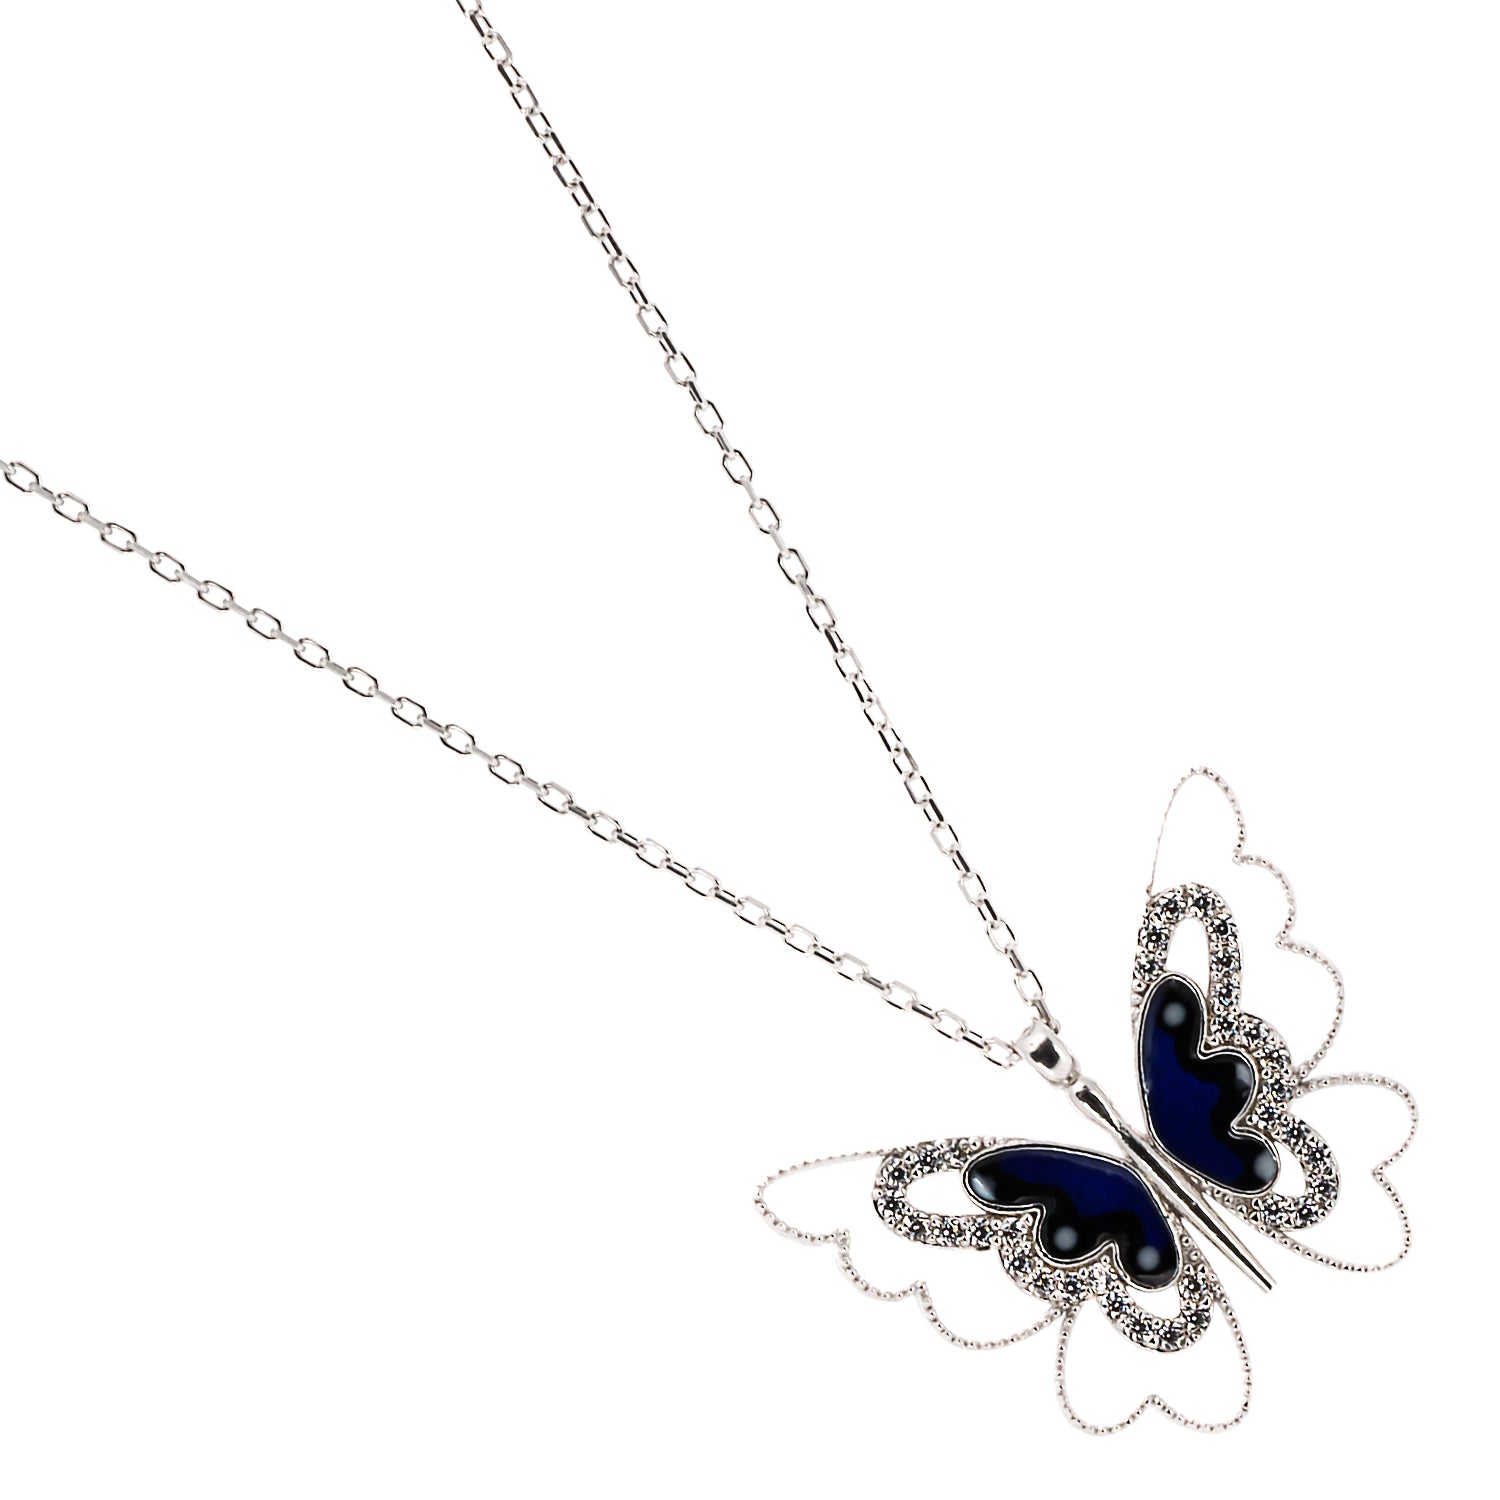 Stylish shot of the Spiritual Transformation Blue Butterfly Necklace, highlighting its unique design and the captivating blue enamel on the butterfly pendant.